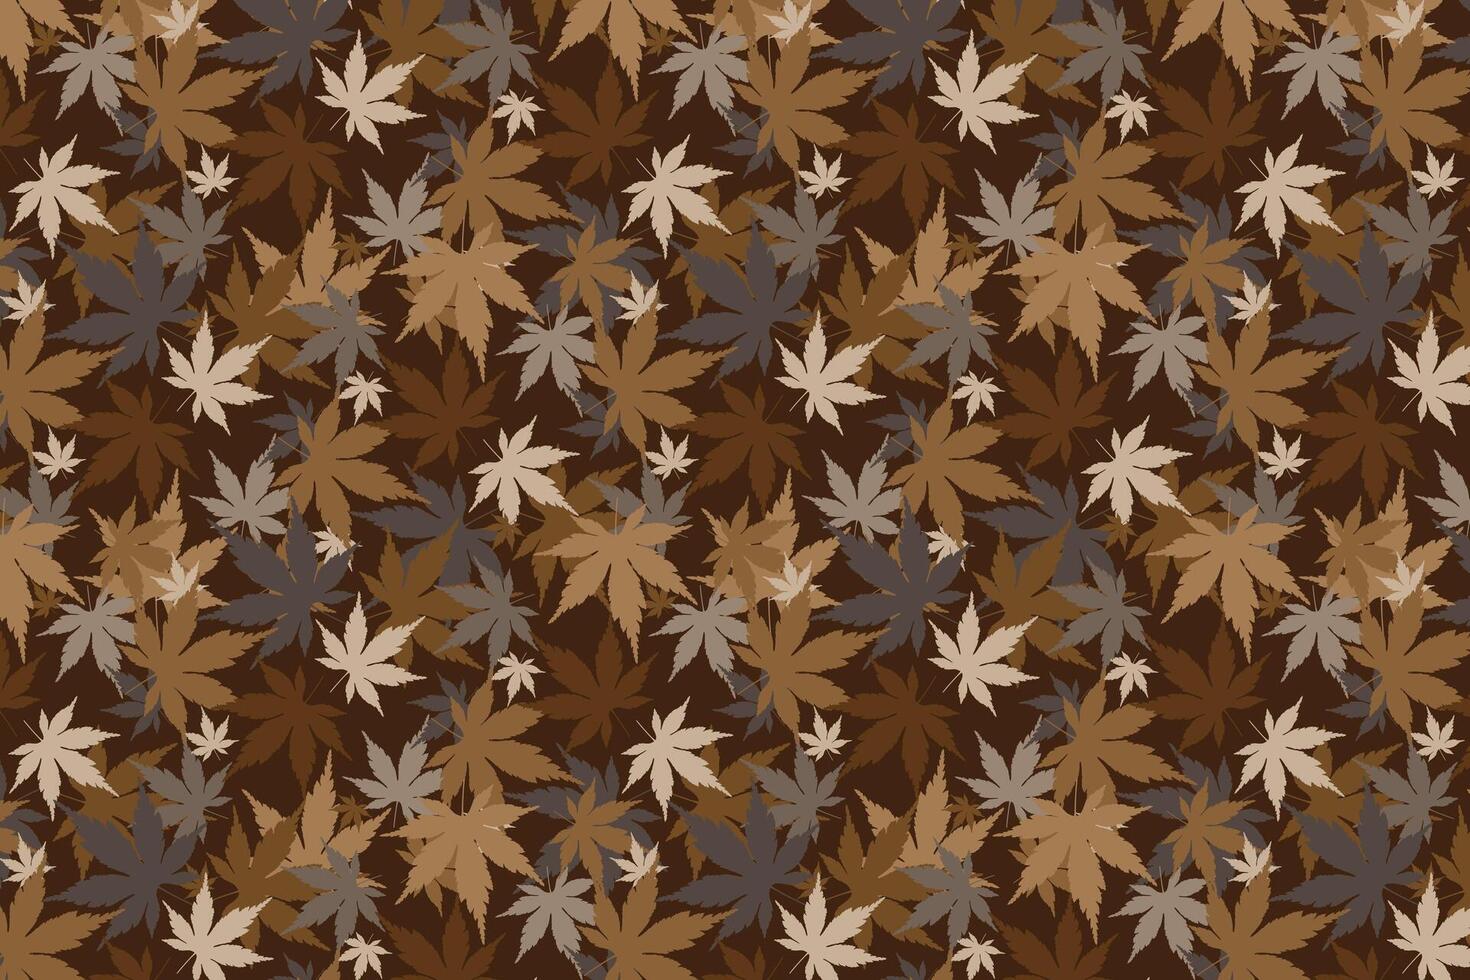 Illustration of the maple leaves on dark brown background. vector